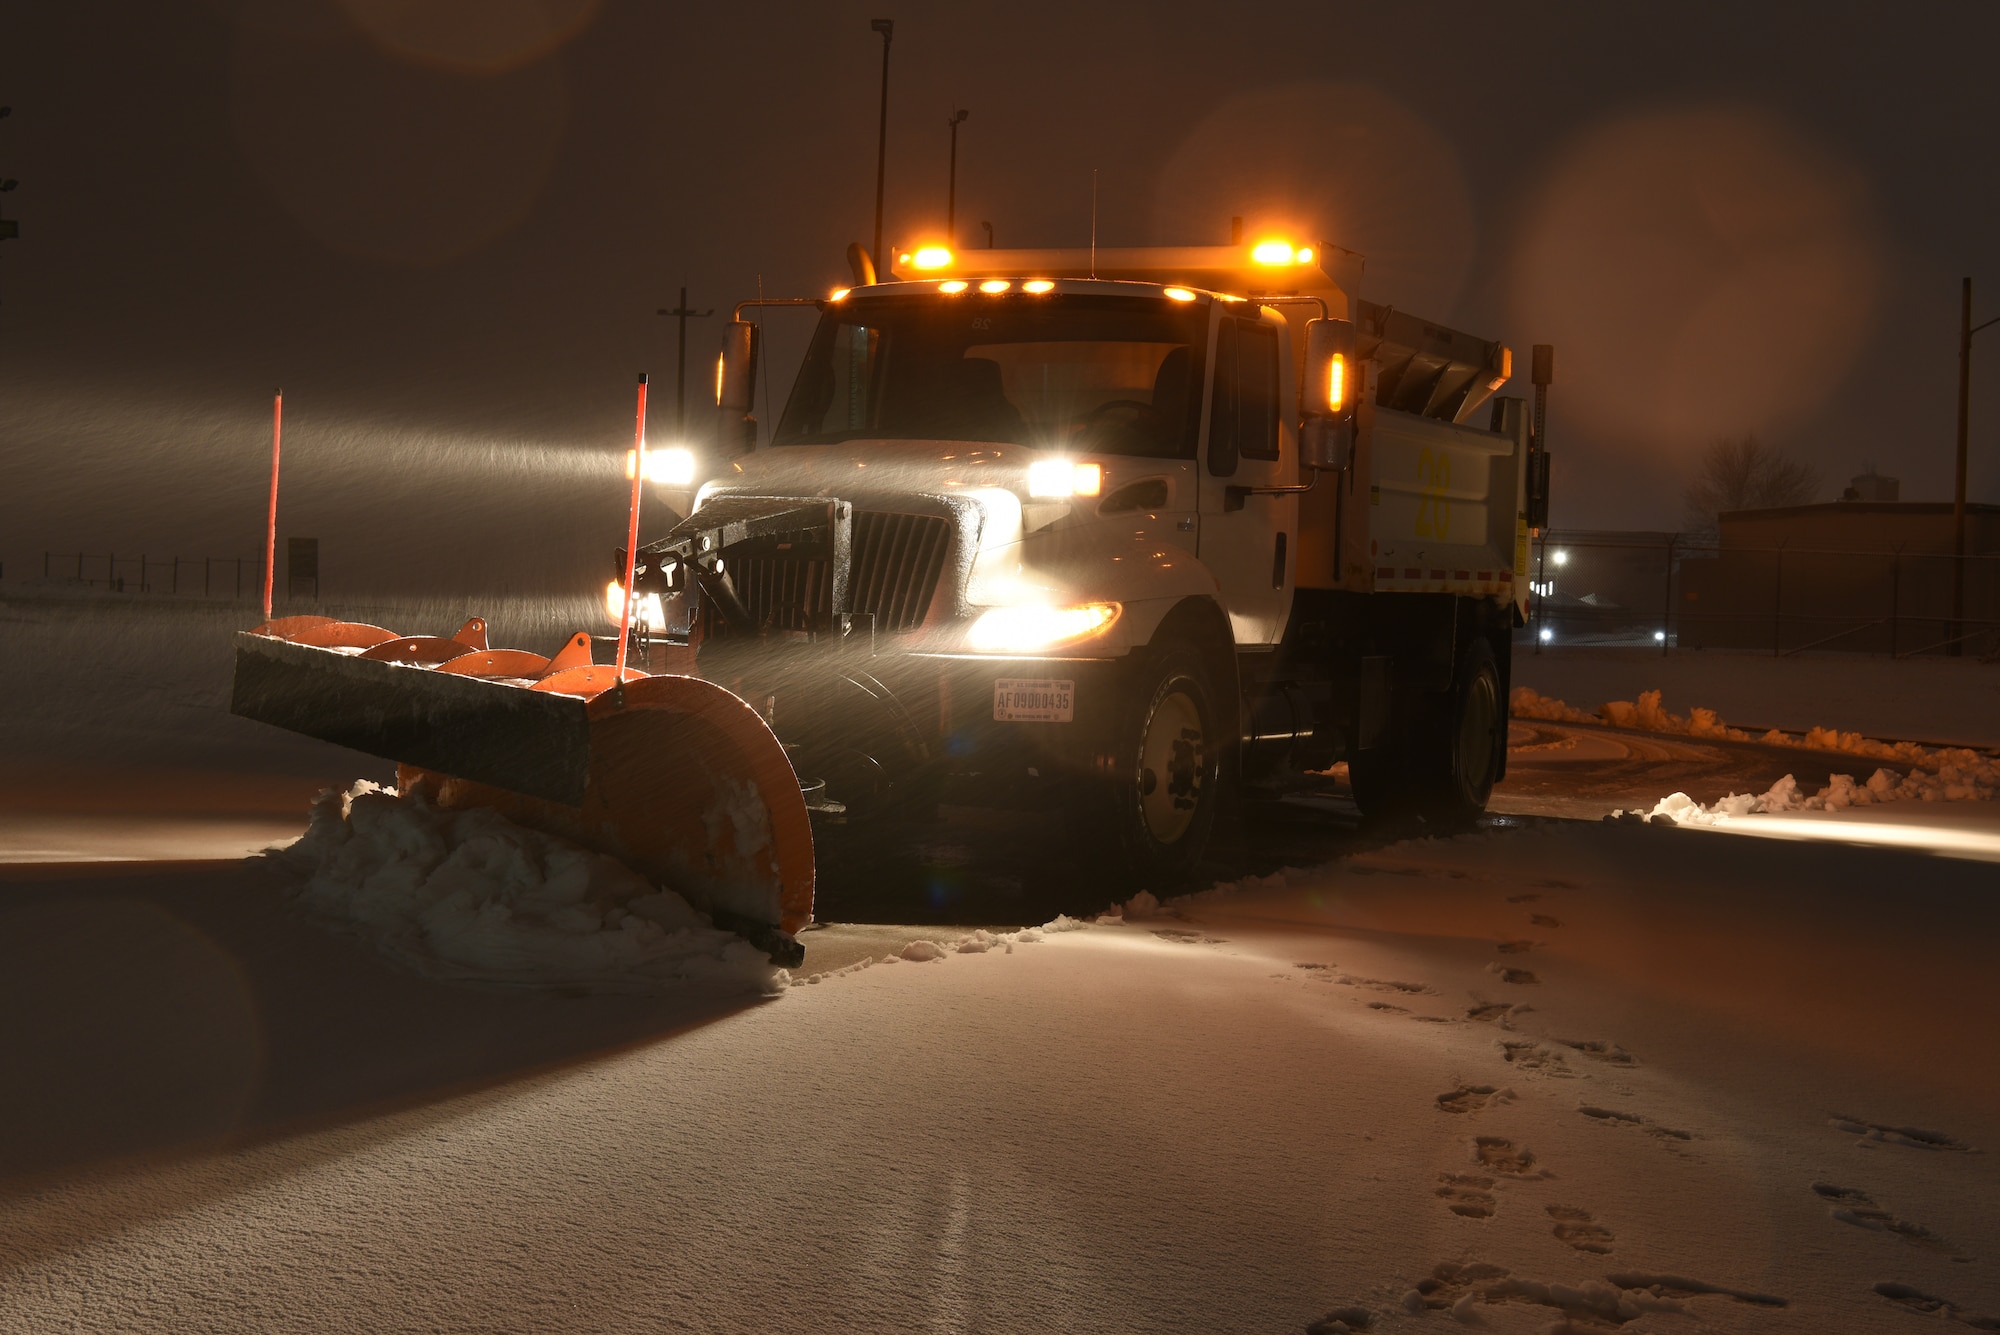 A 28th Civil Engineer Squadron chip truck clears snow in a parking lot during a snowstorm at Ellsworth Air Force Base, S.D., April 13, 2018. Non-essential base functions were suspended due to inclement weather, but heavy equipment operators continued on staggered shifts to remove snow and improve driving conditions. (U.S. Air Force photo by Airman 1st Class Thomas Karol)